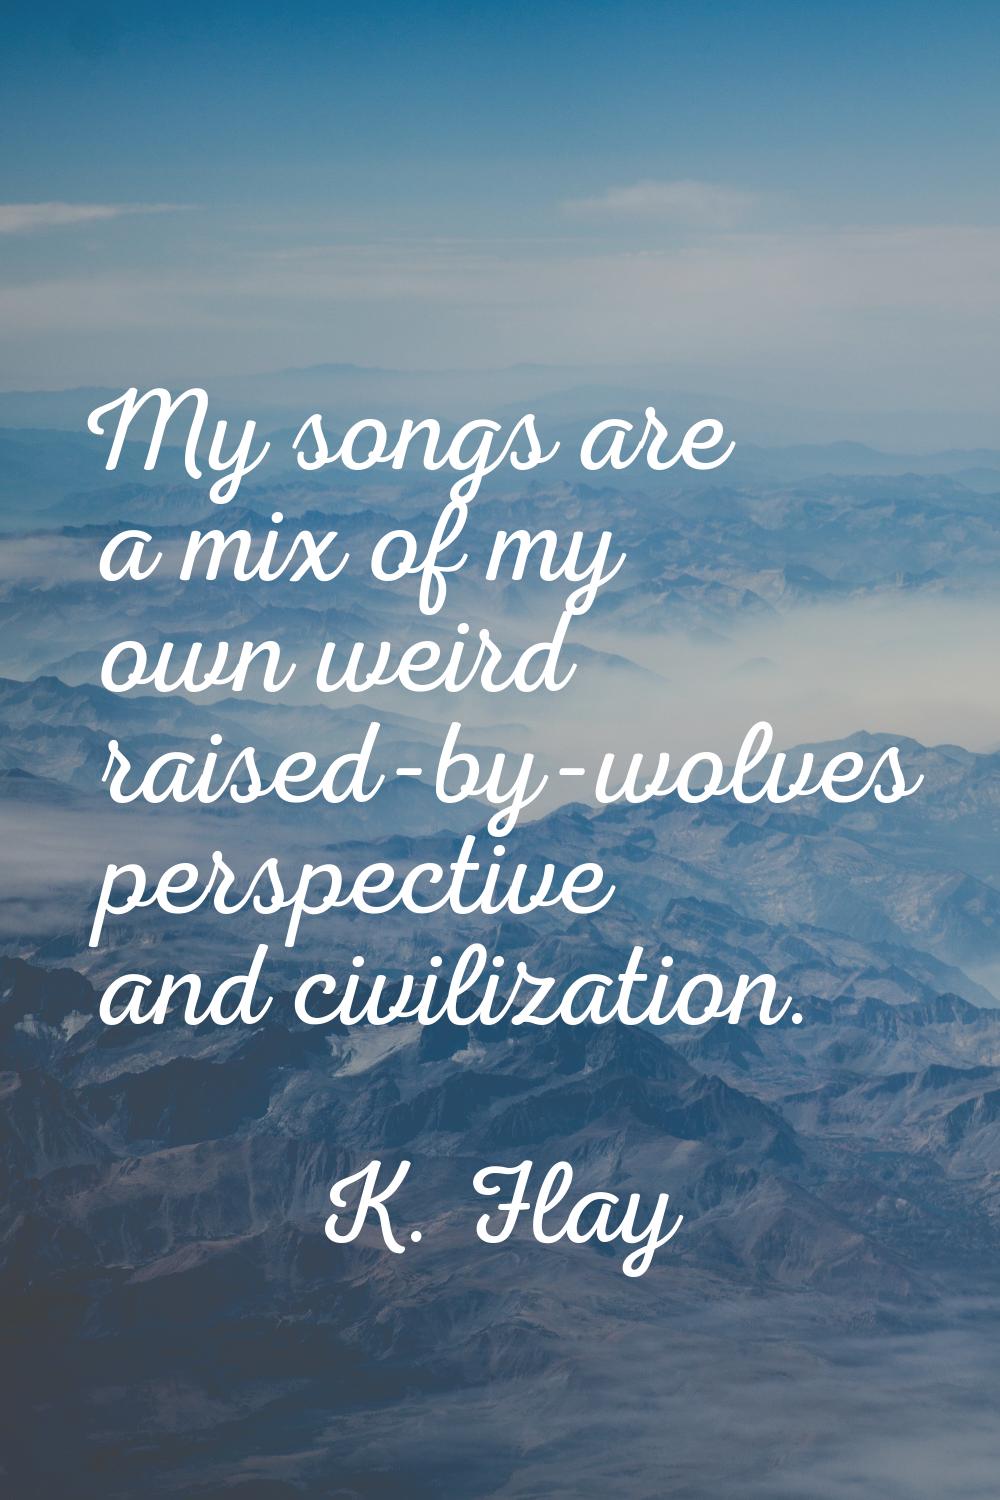 My songs are a mix of my own weird raised-by-wolves perspective and civilization.